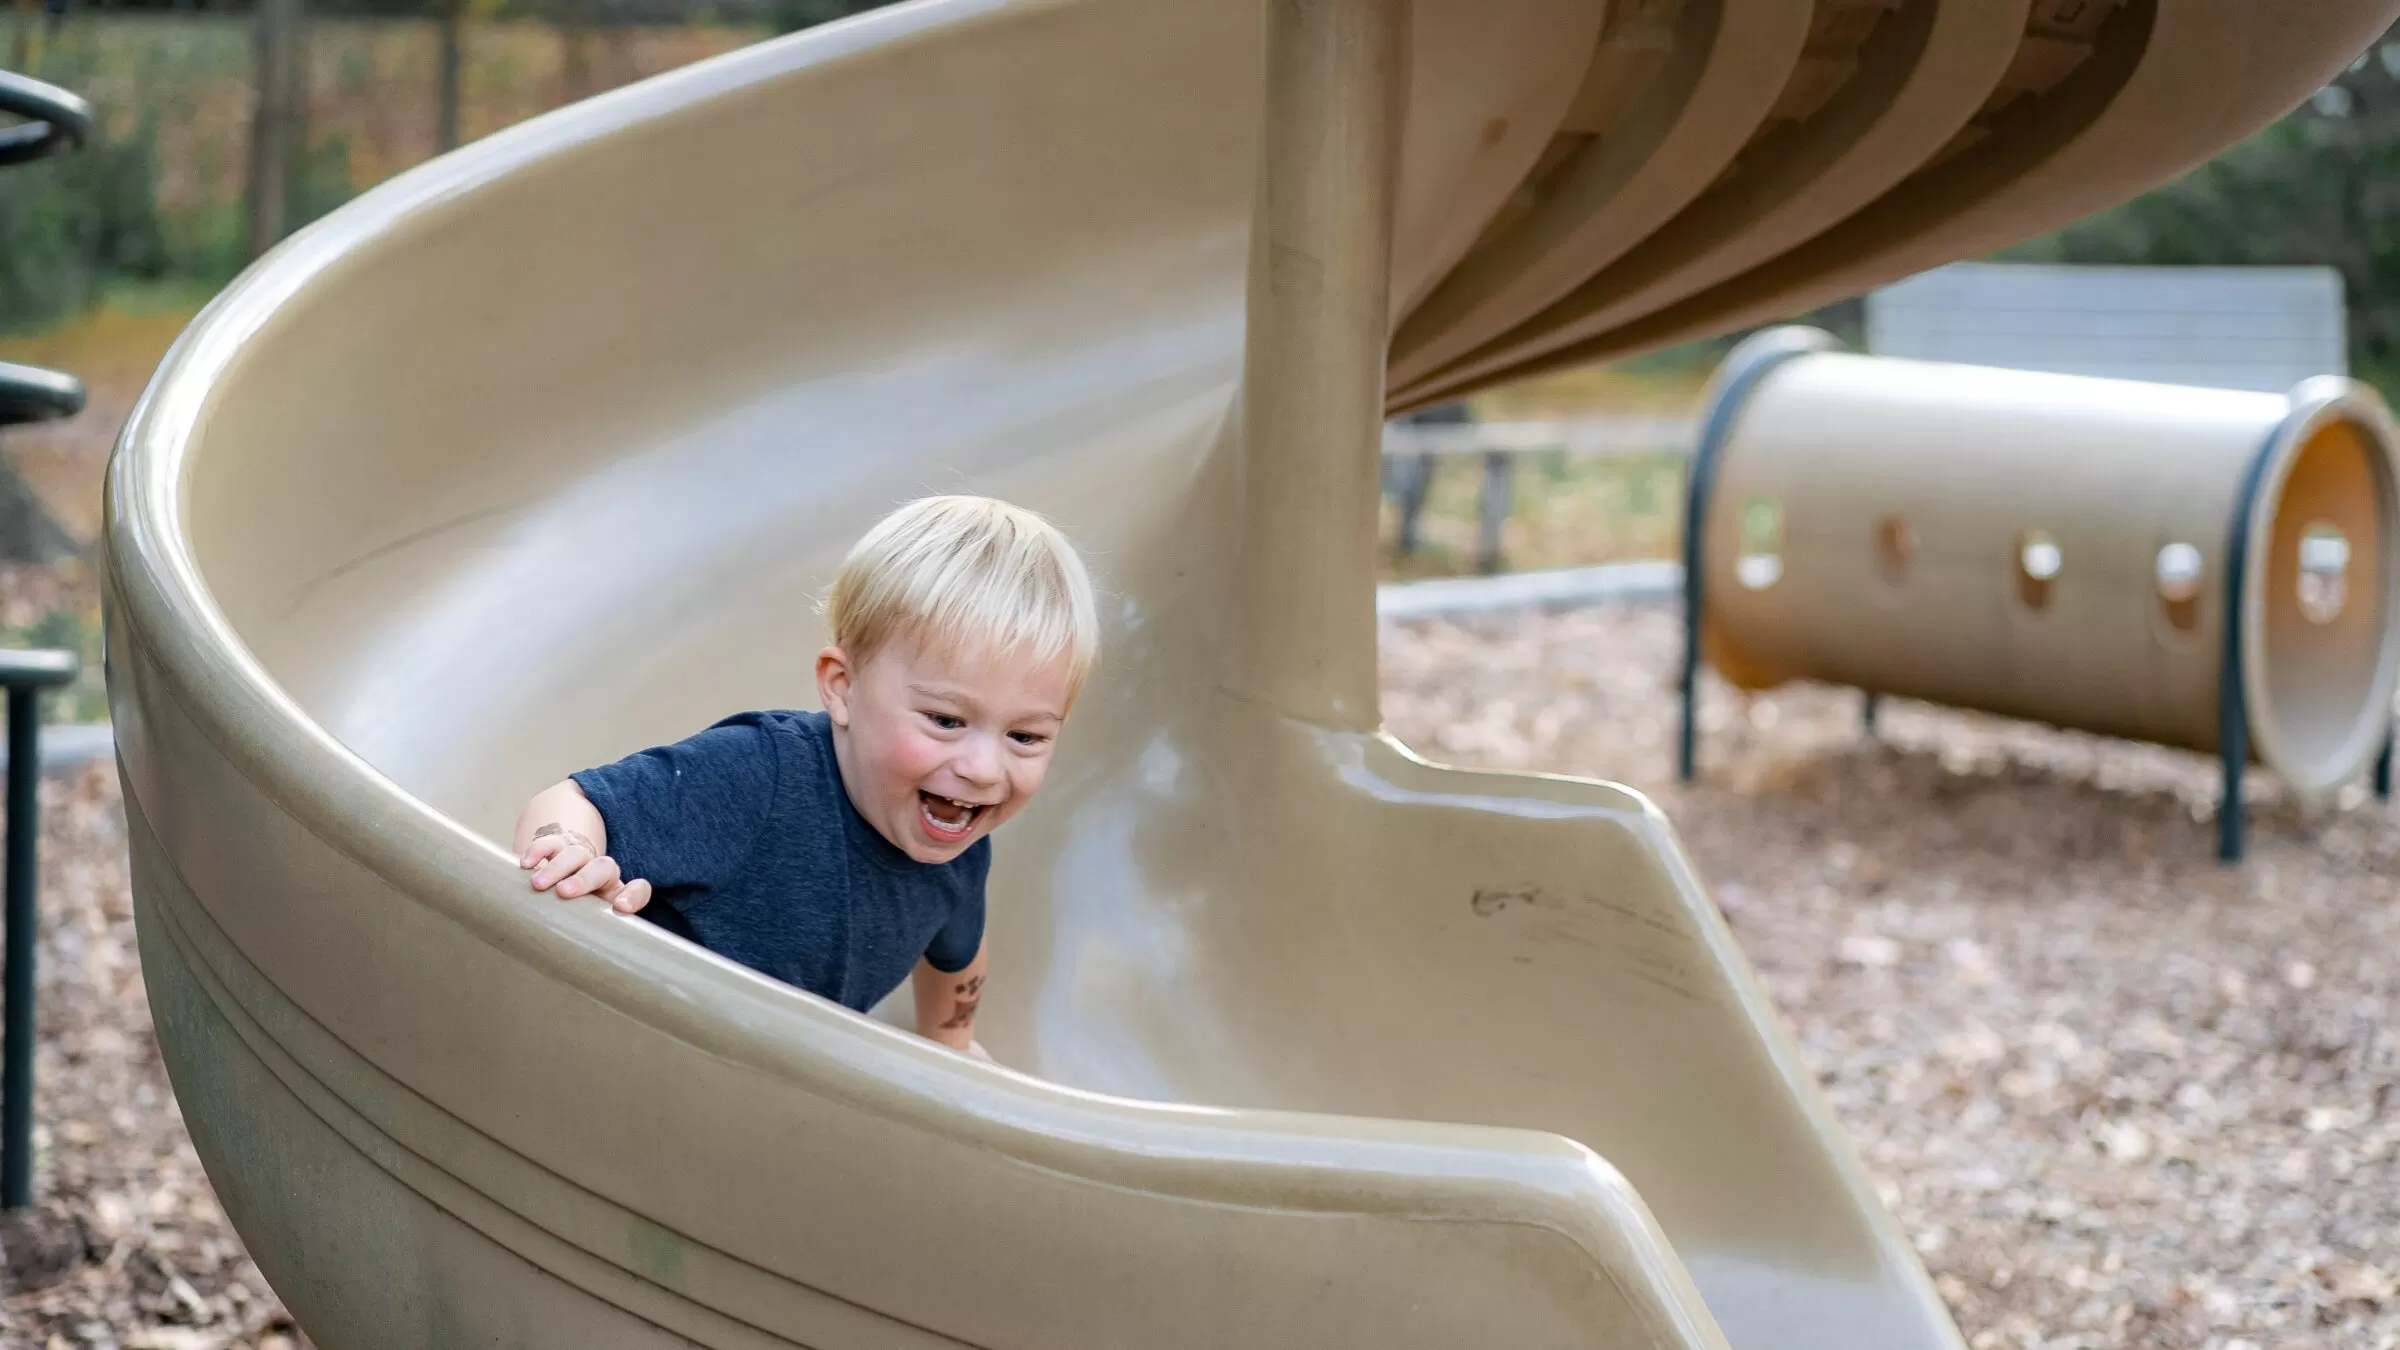 German Insurance Companies Demand Perilous Playgrounds So That Kids Can Learn About Risk